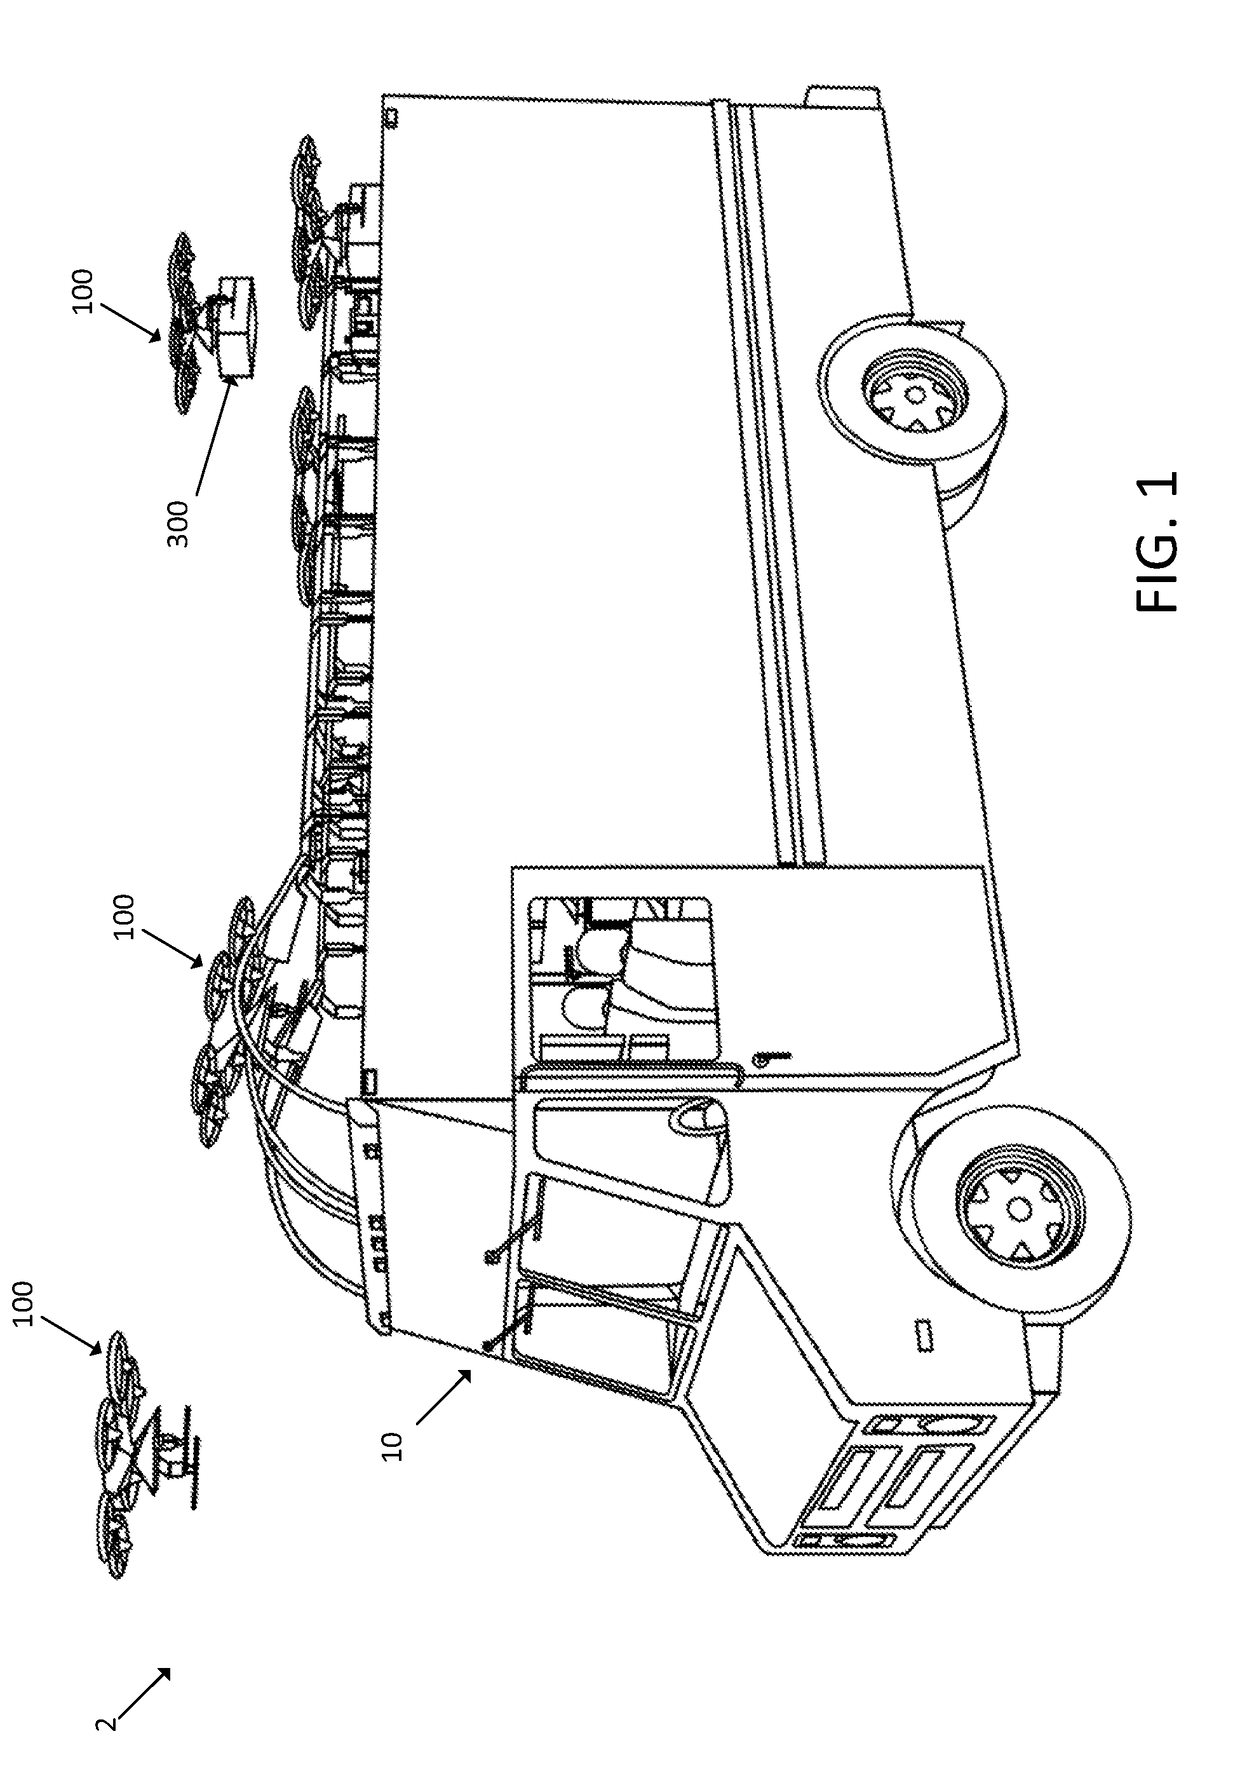 Unmanned aerial vehicle including a removable power source